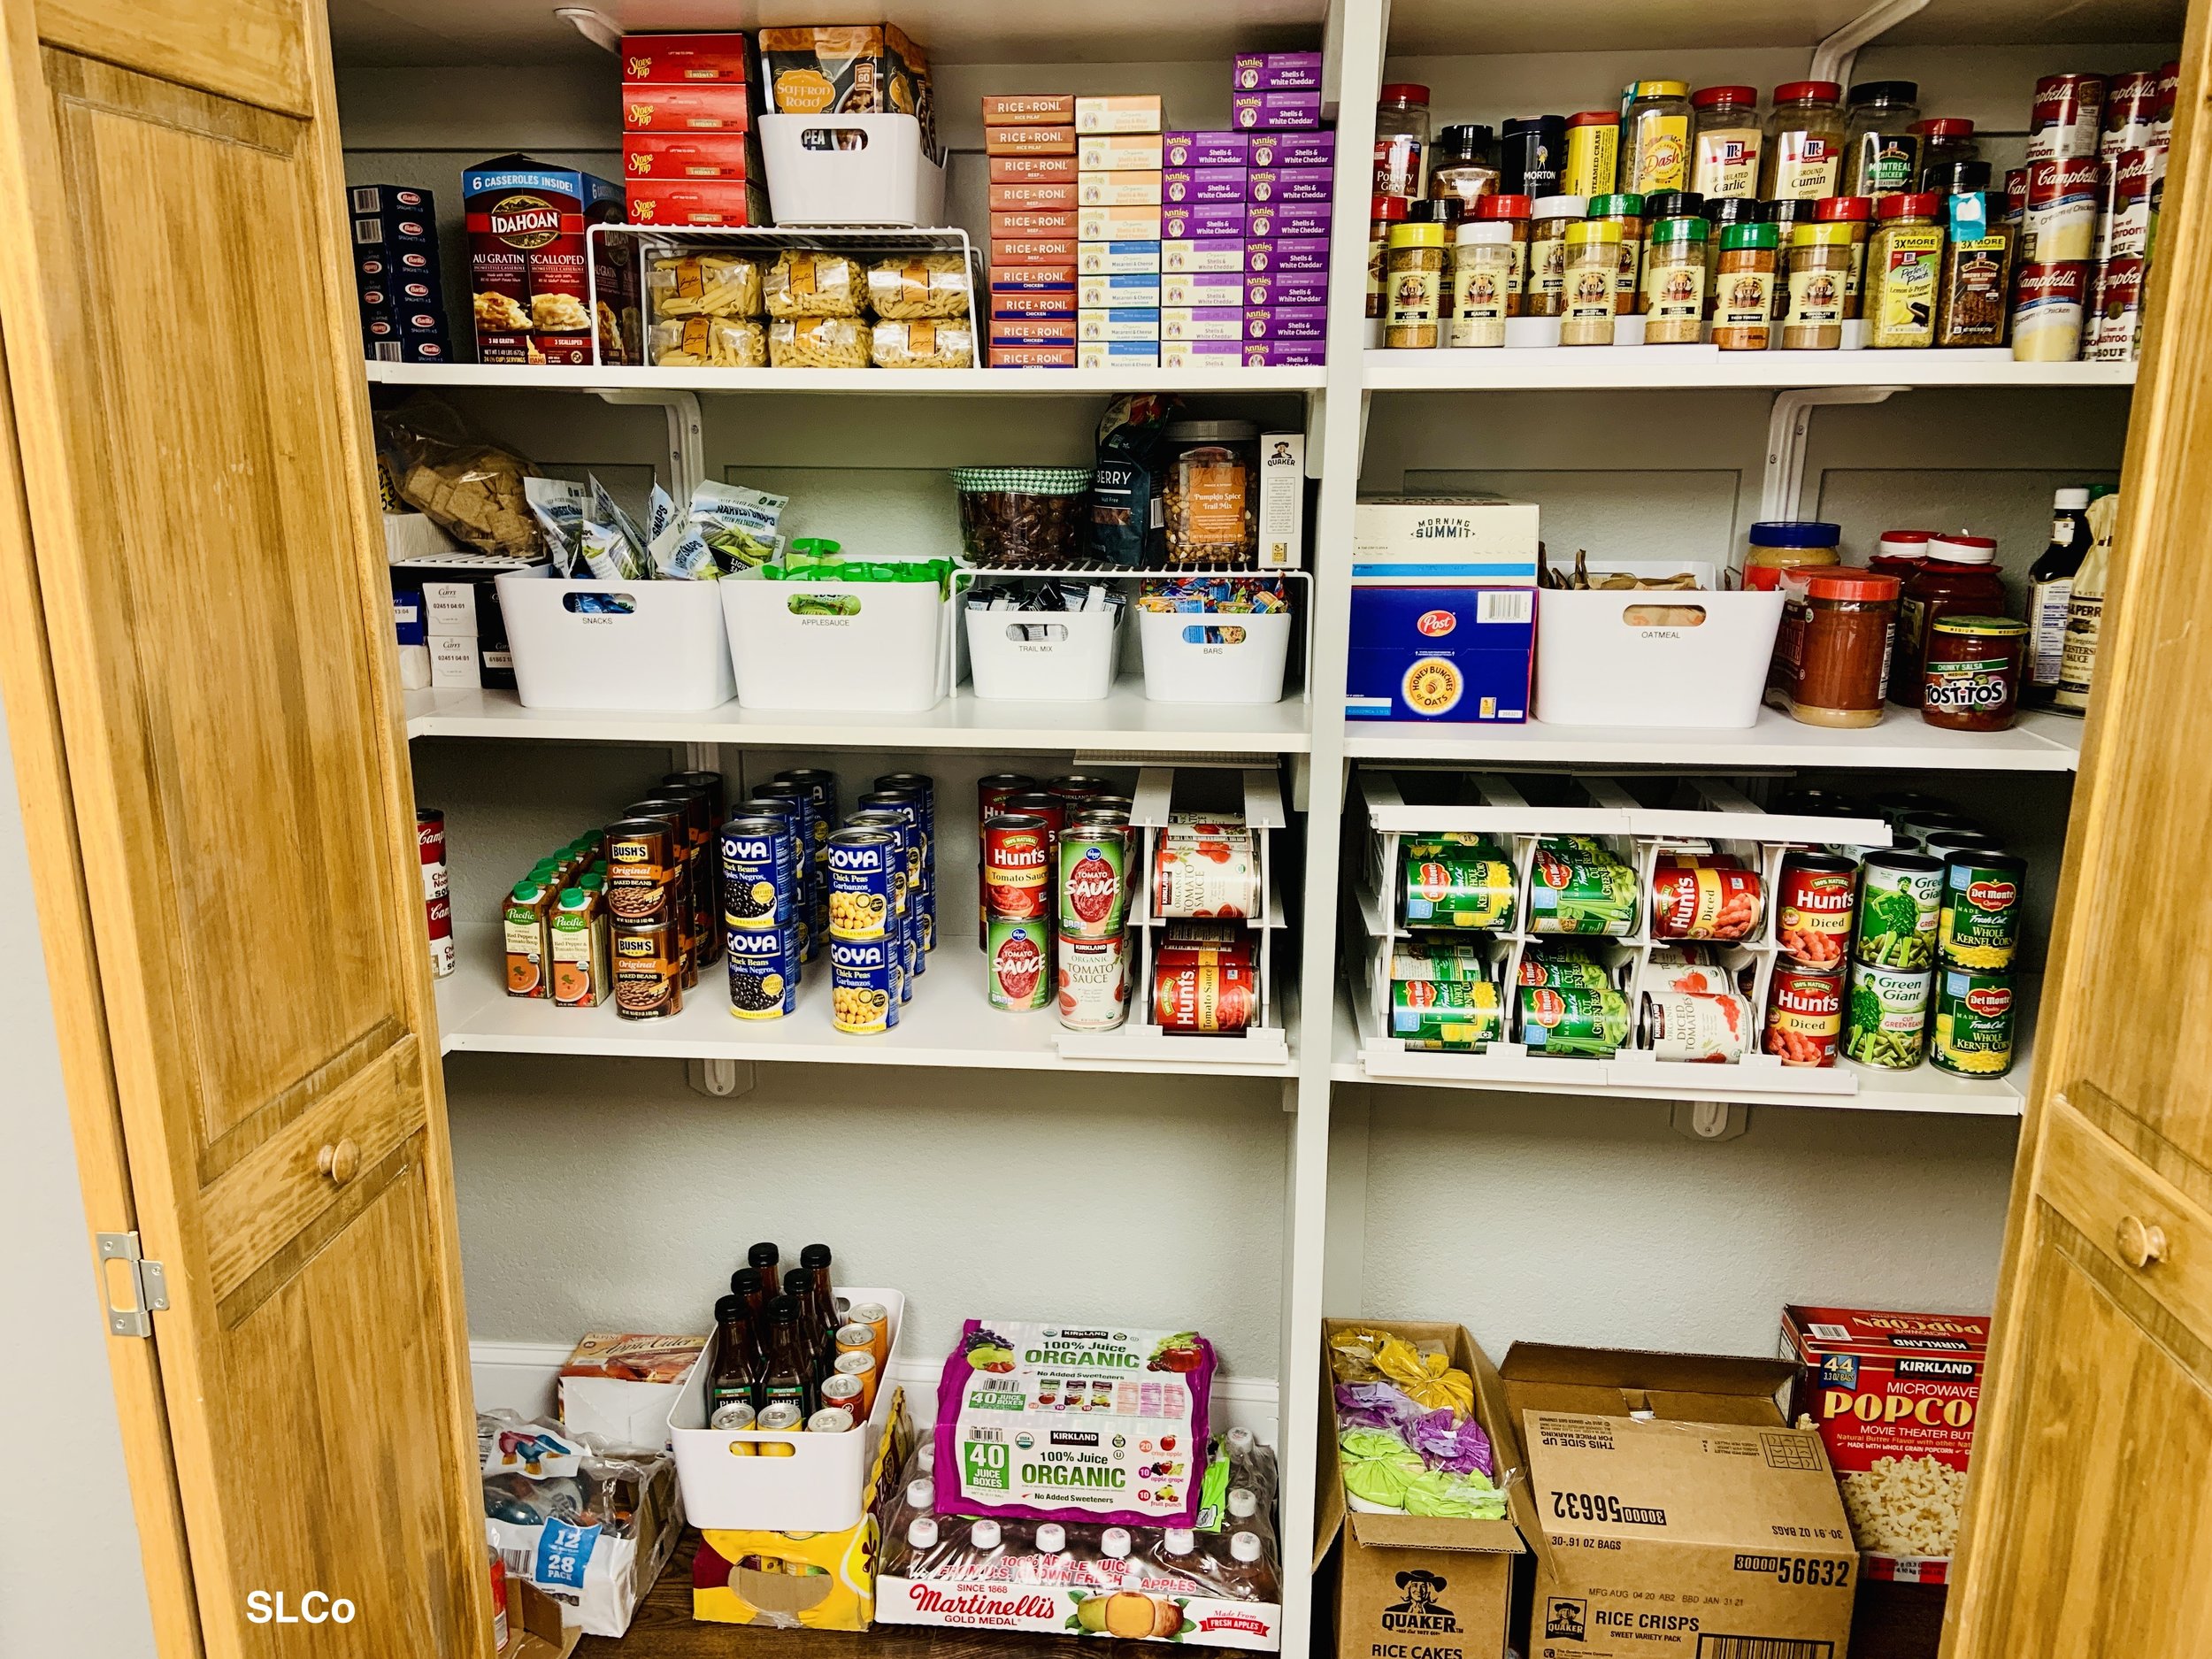 After photo of pantry with four shelves and everything nearly organized with cans, ramen, noodles, spices, and more.